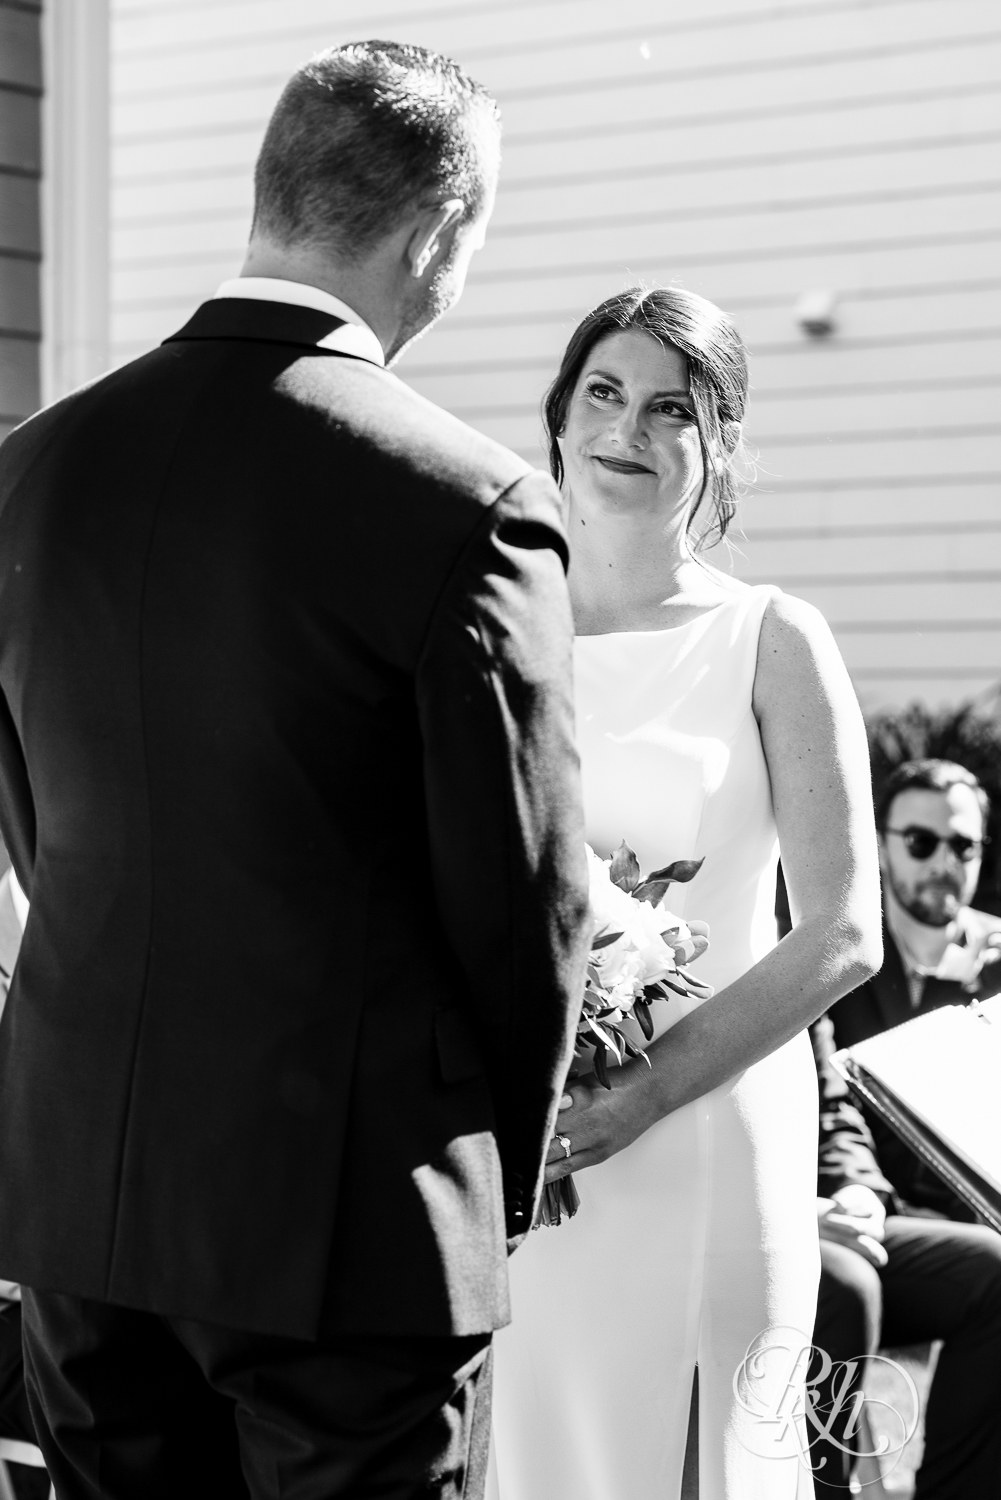 Bride and groom smiling at wedding ceremony at home in Eagan, Minnesota.